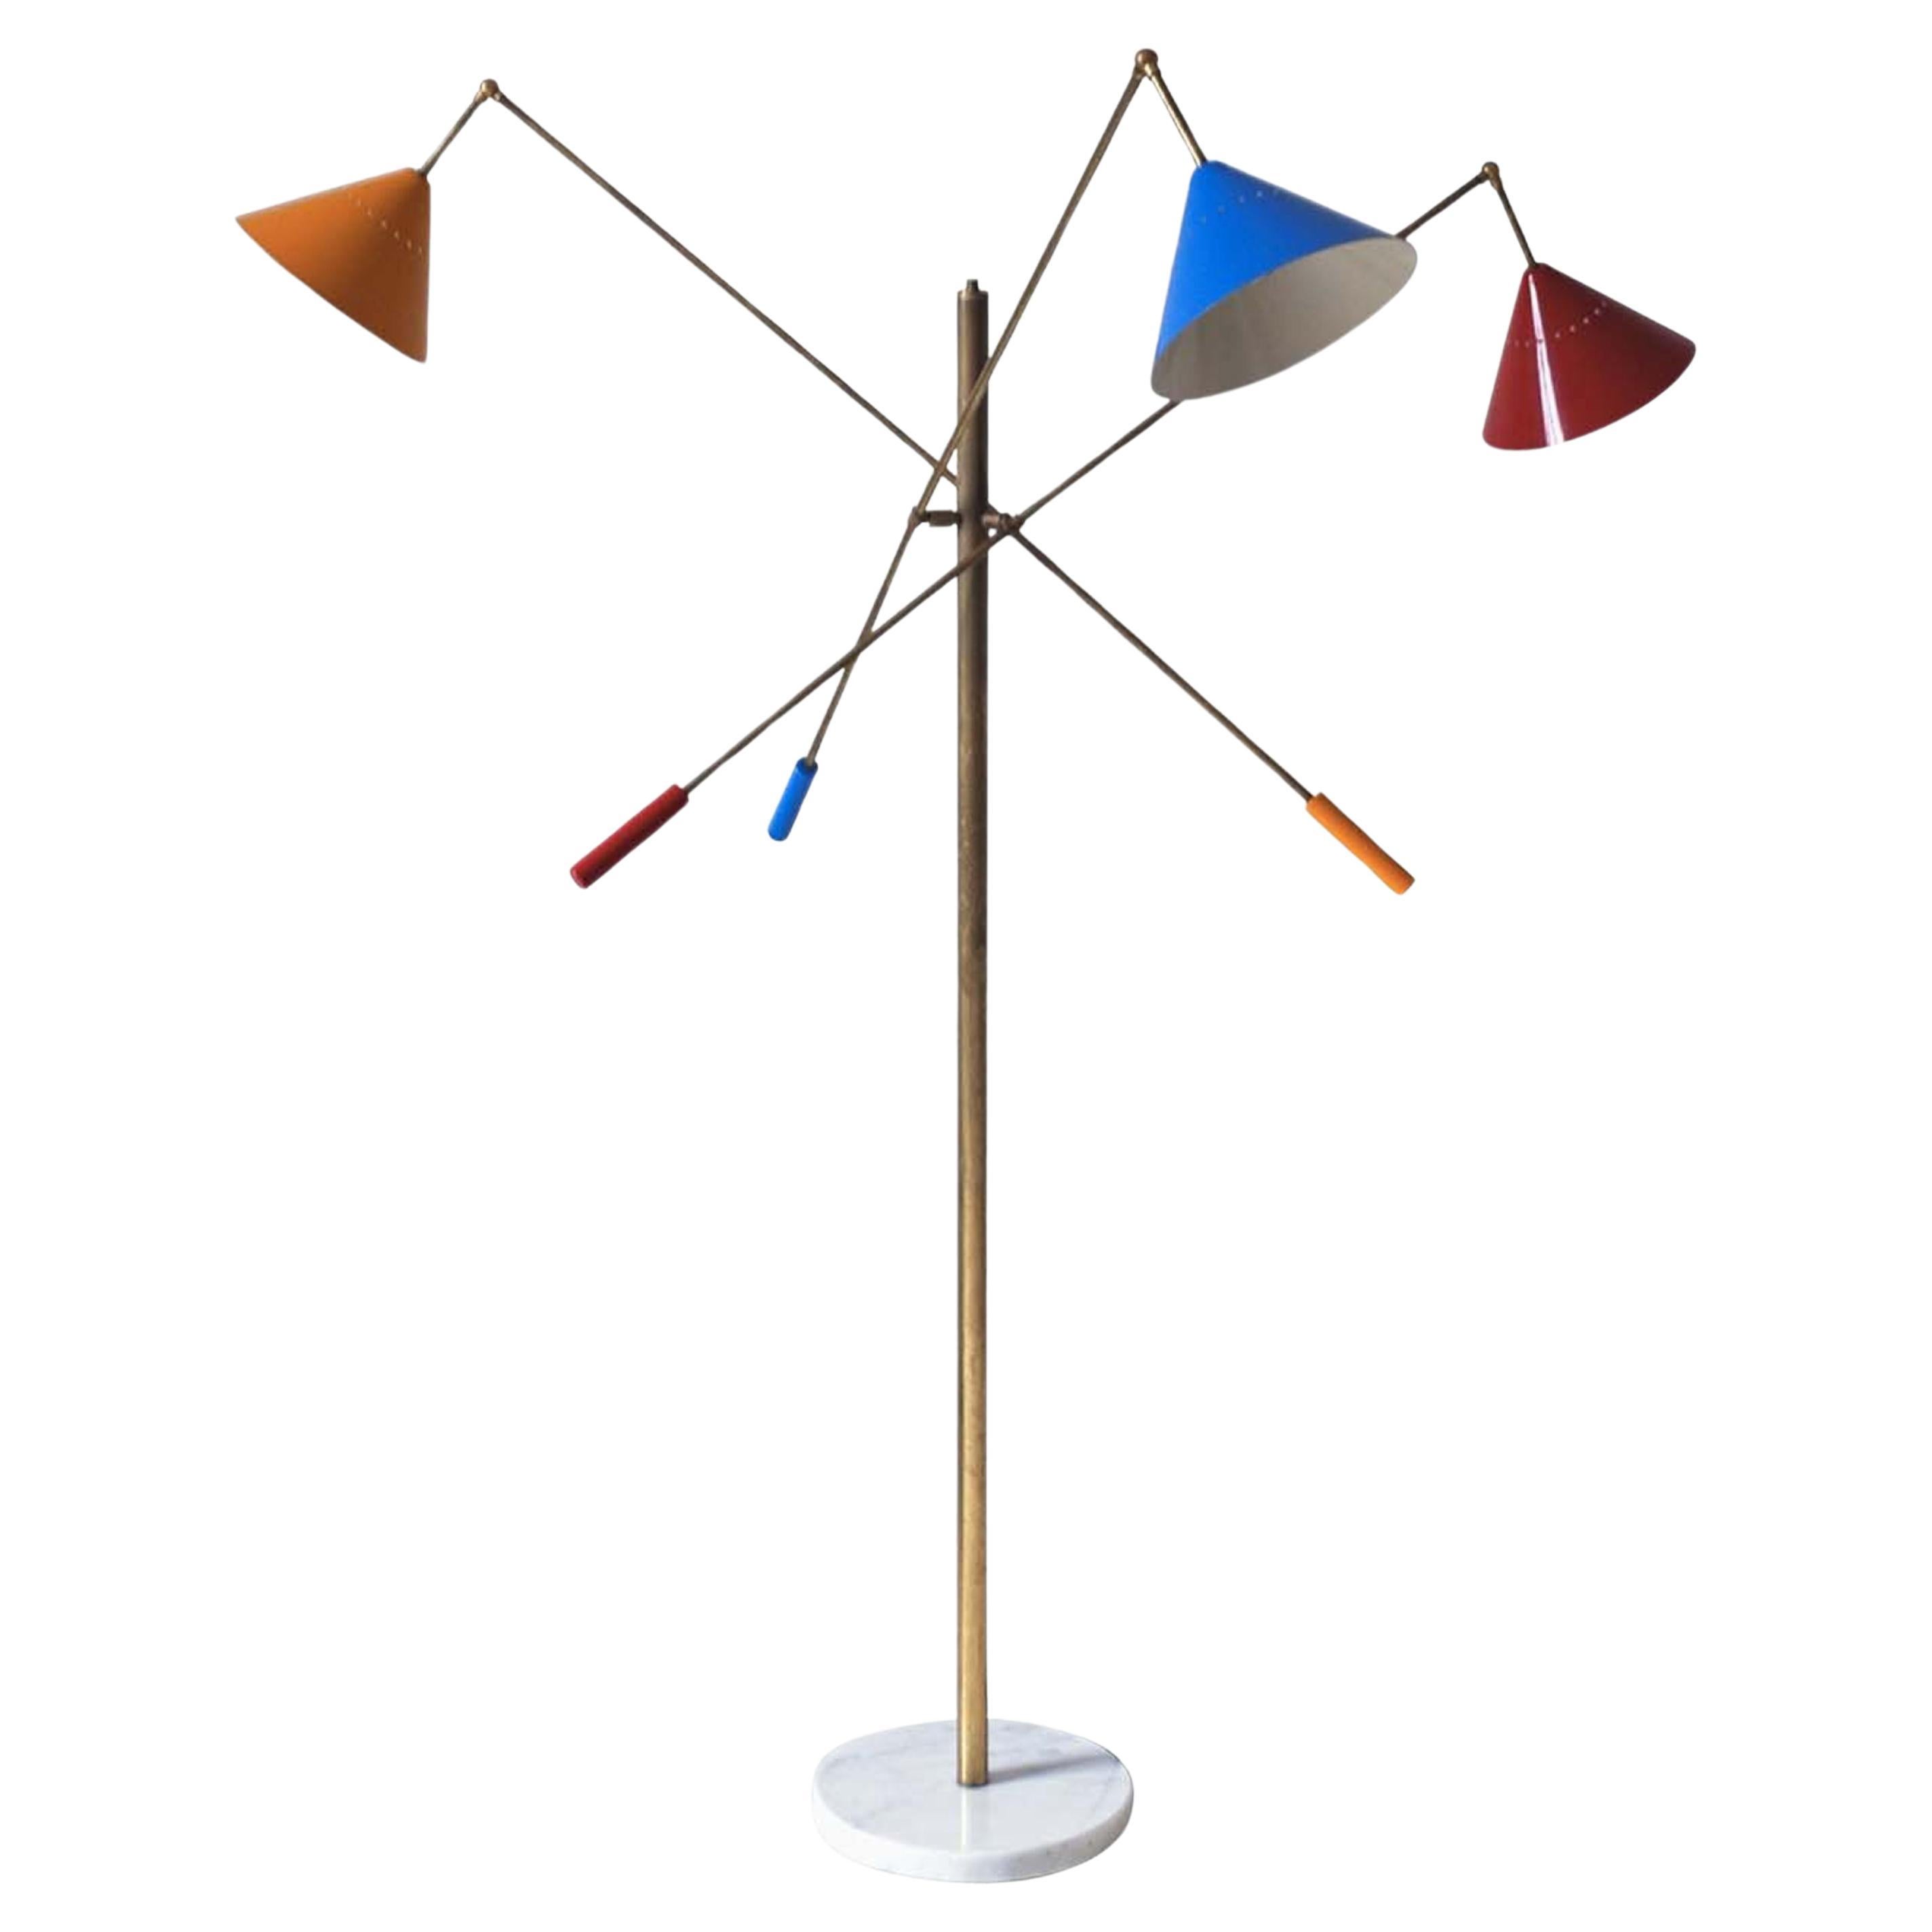 Contrappeso 3-Arm Brass RGB Floor Lamp